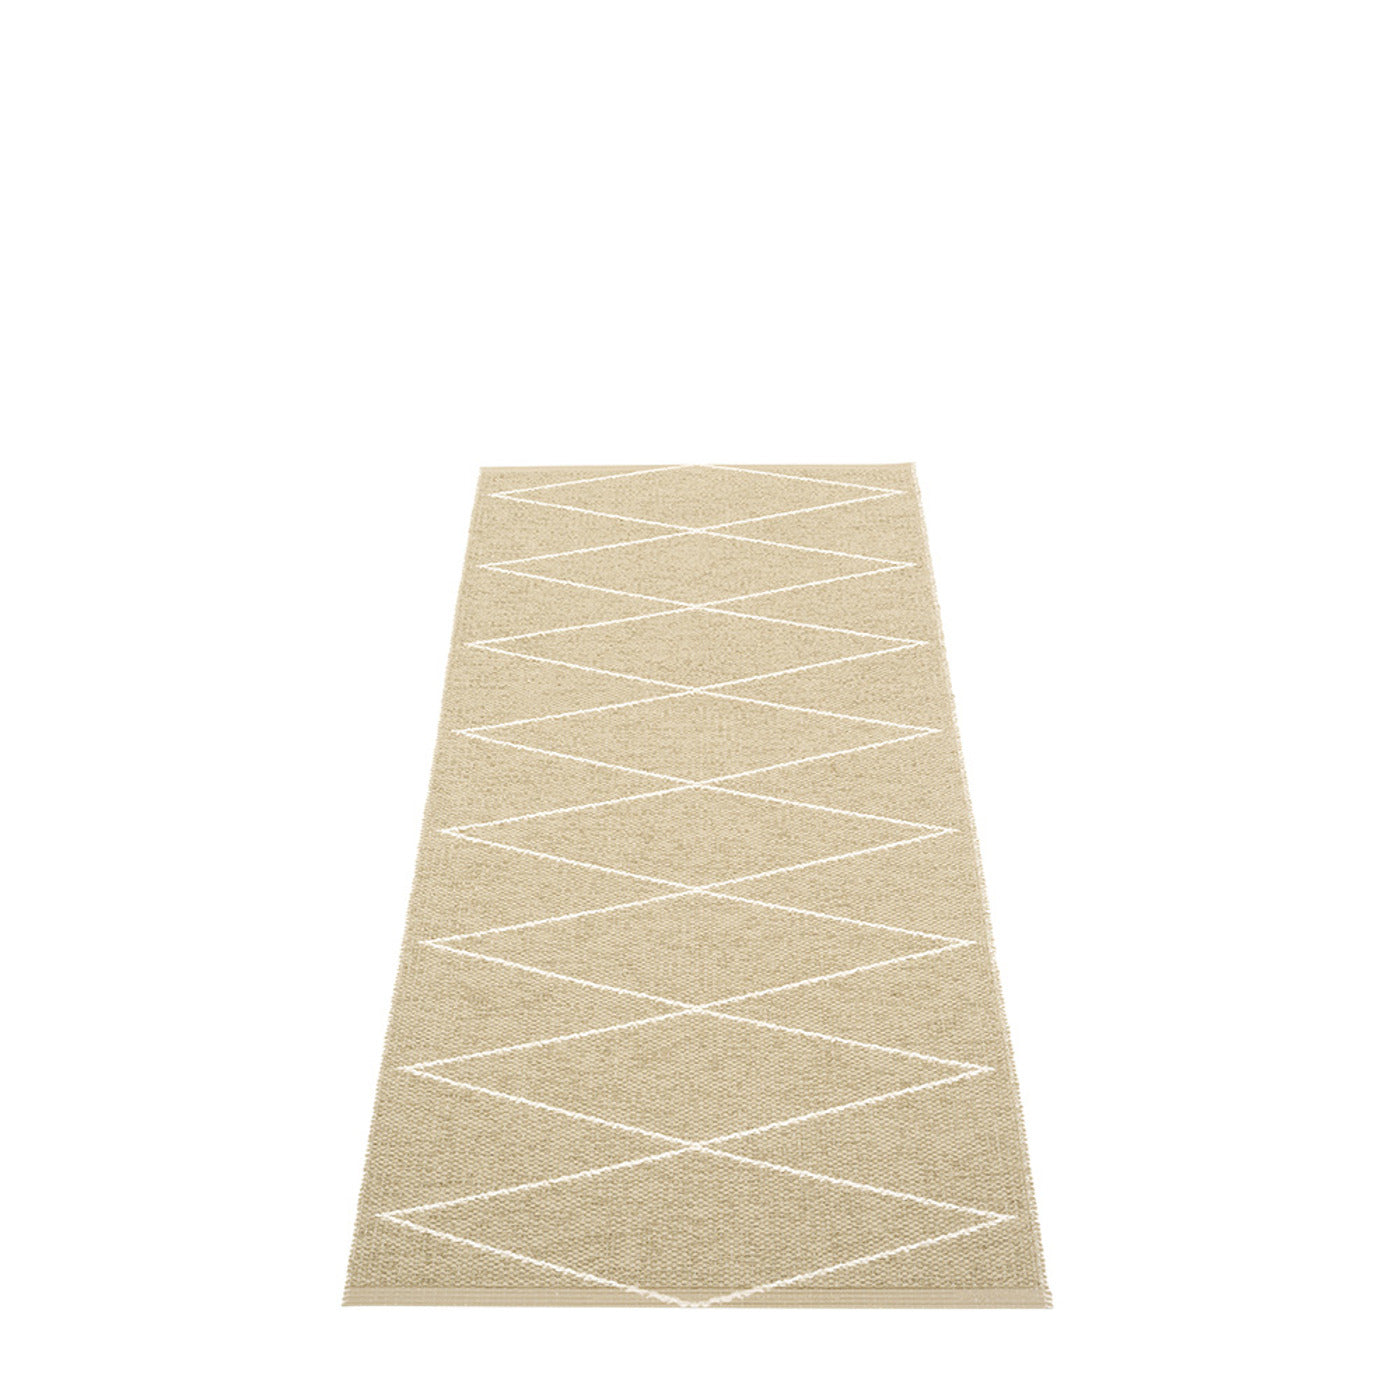 All sizes MAX RUG - Sand